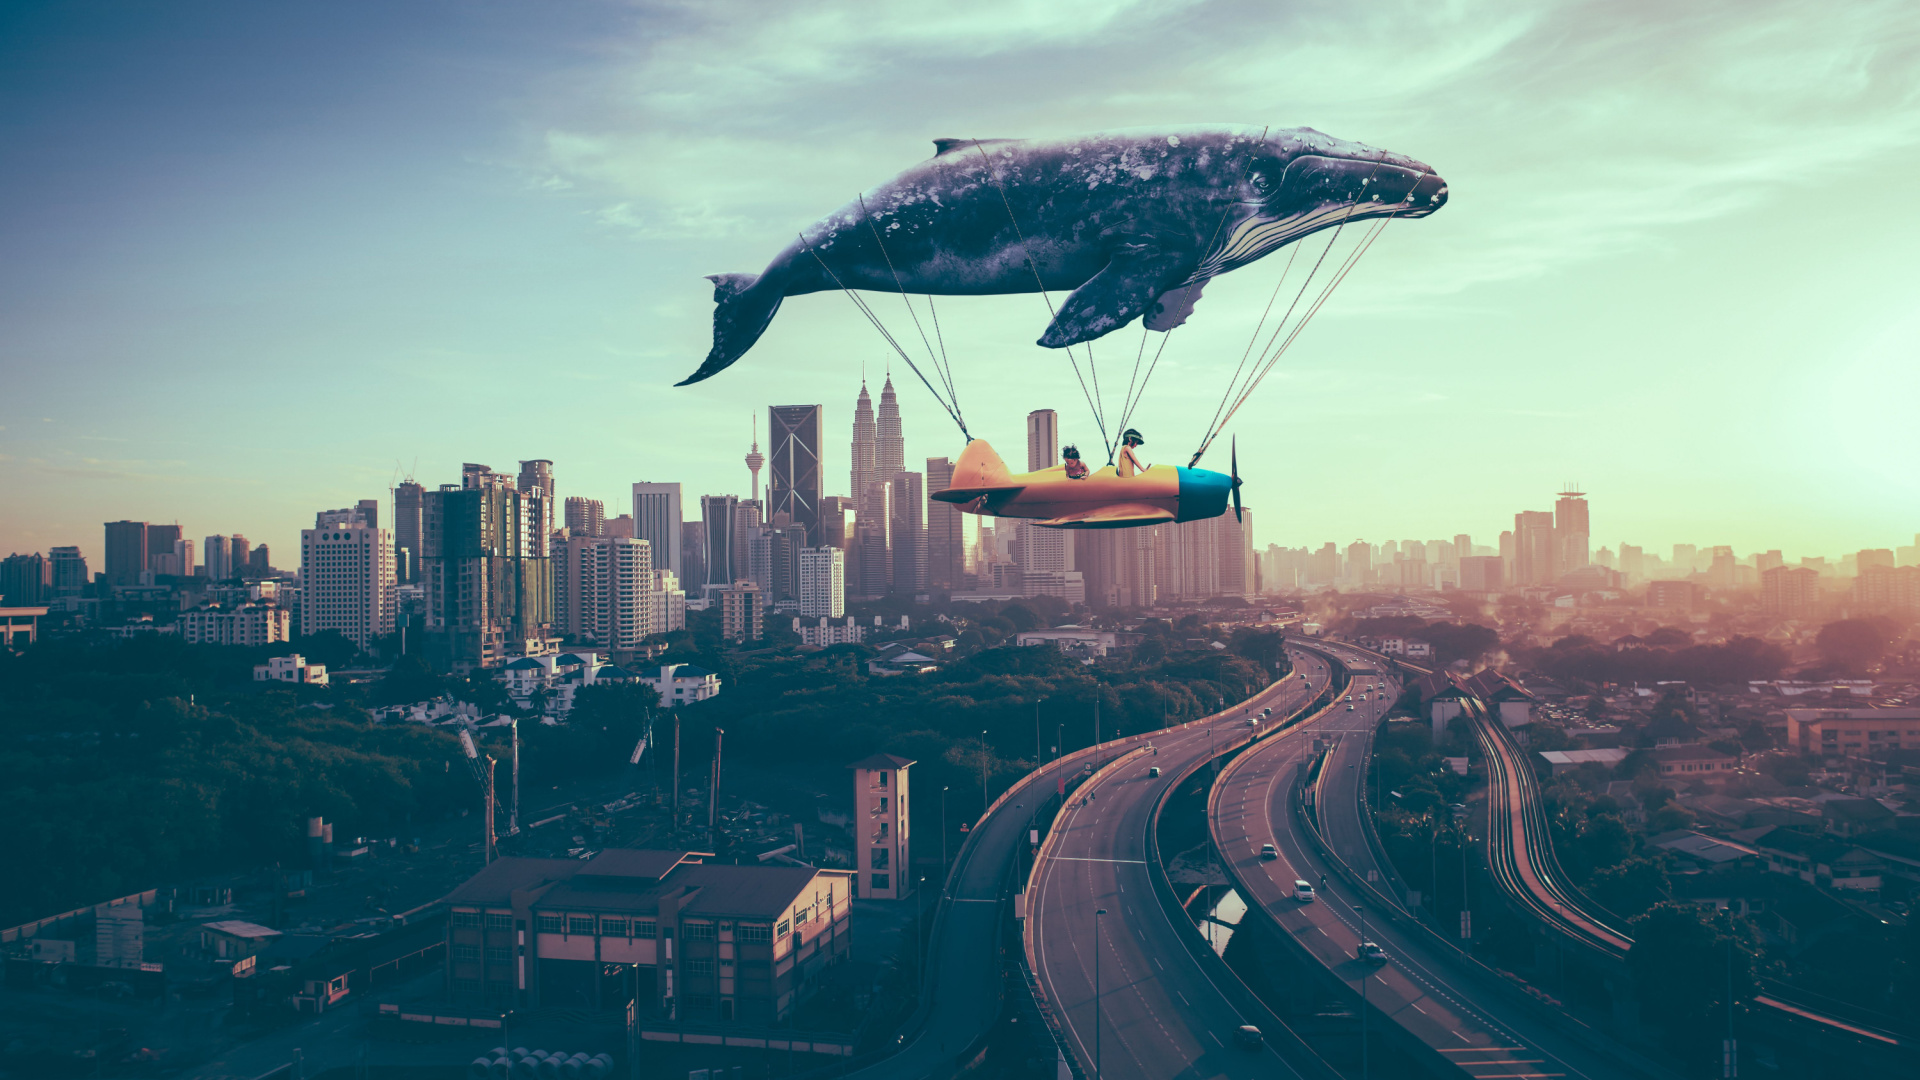 Big Bitcoin Whale May Be Getting Ready to Sell: Taking Action After 8 Months!